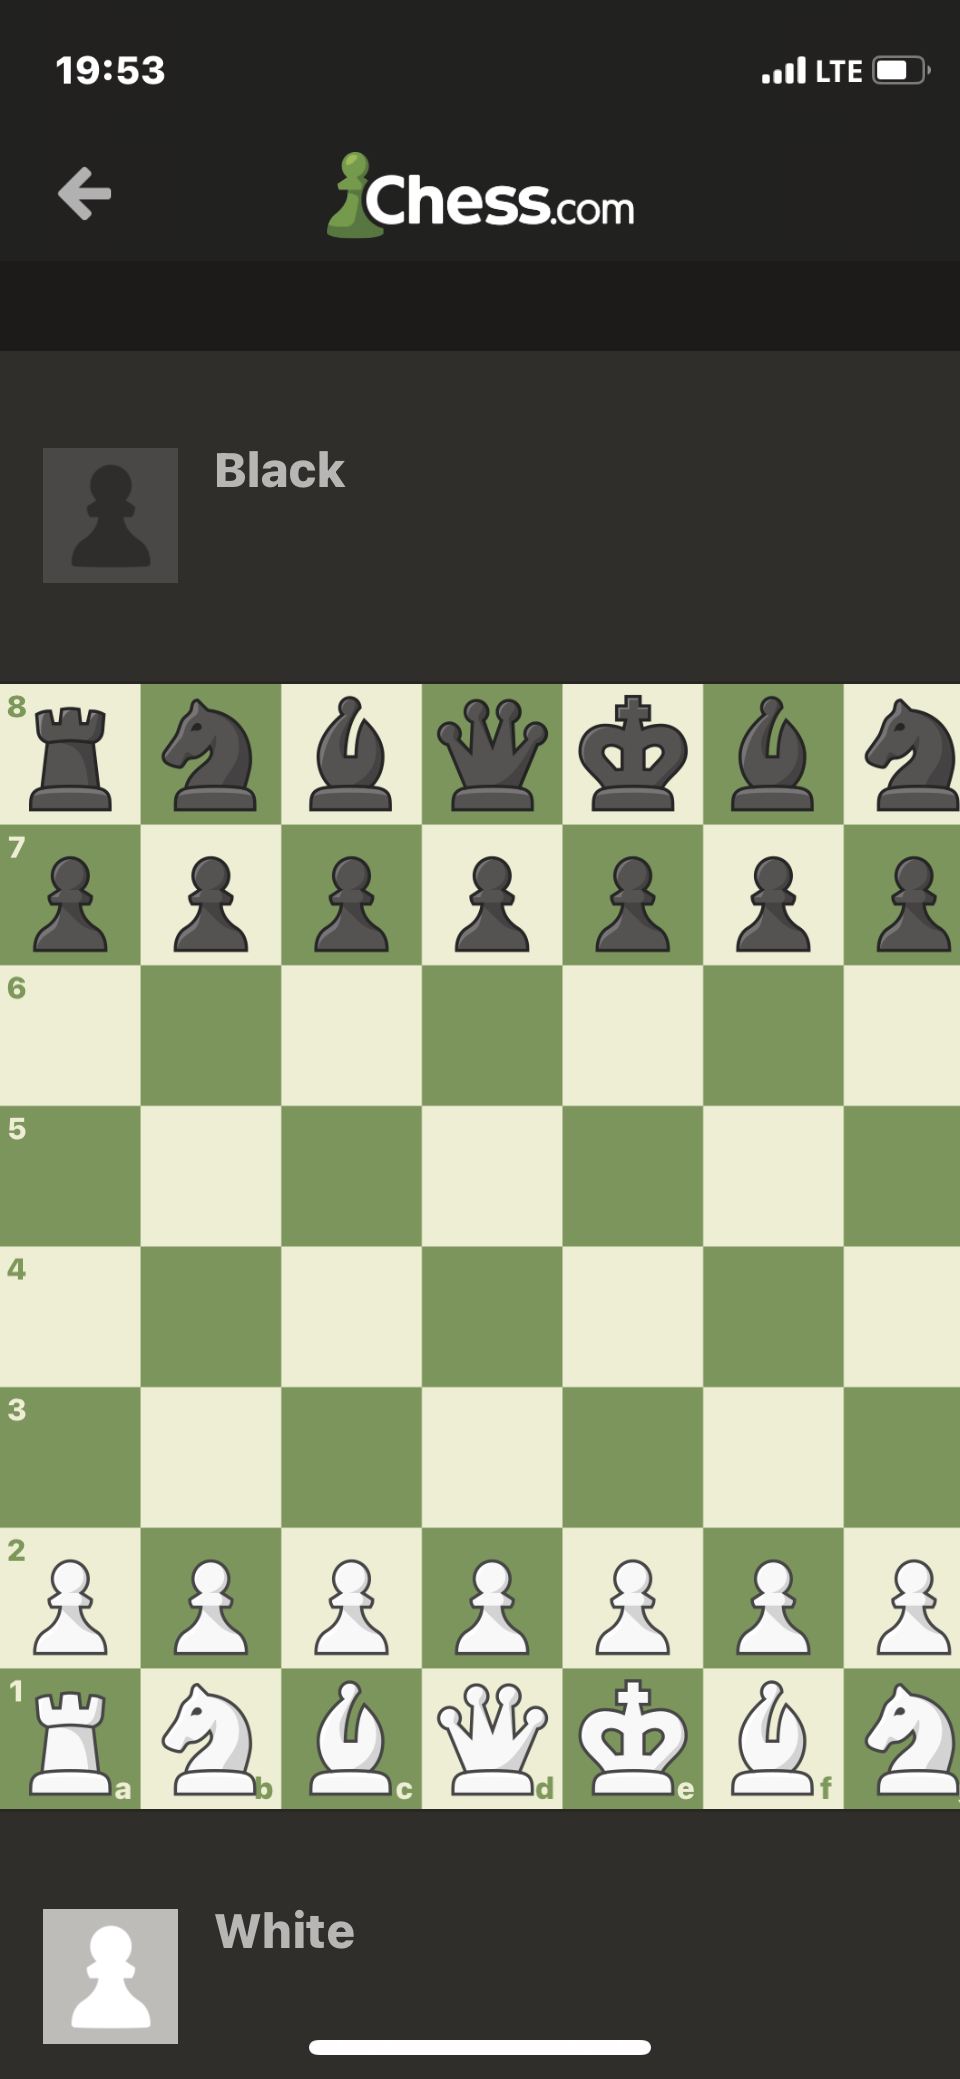 Gray circle when I touch a piece on iOS app - Chess Forums 